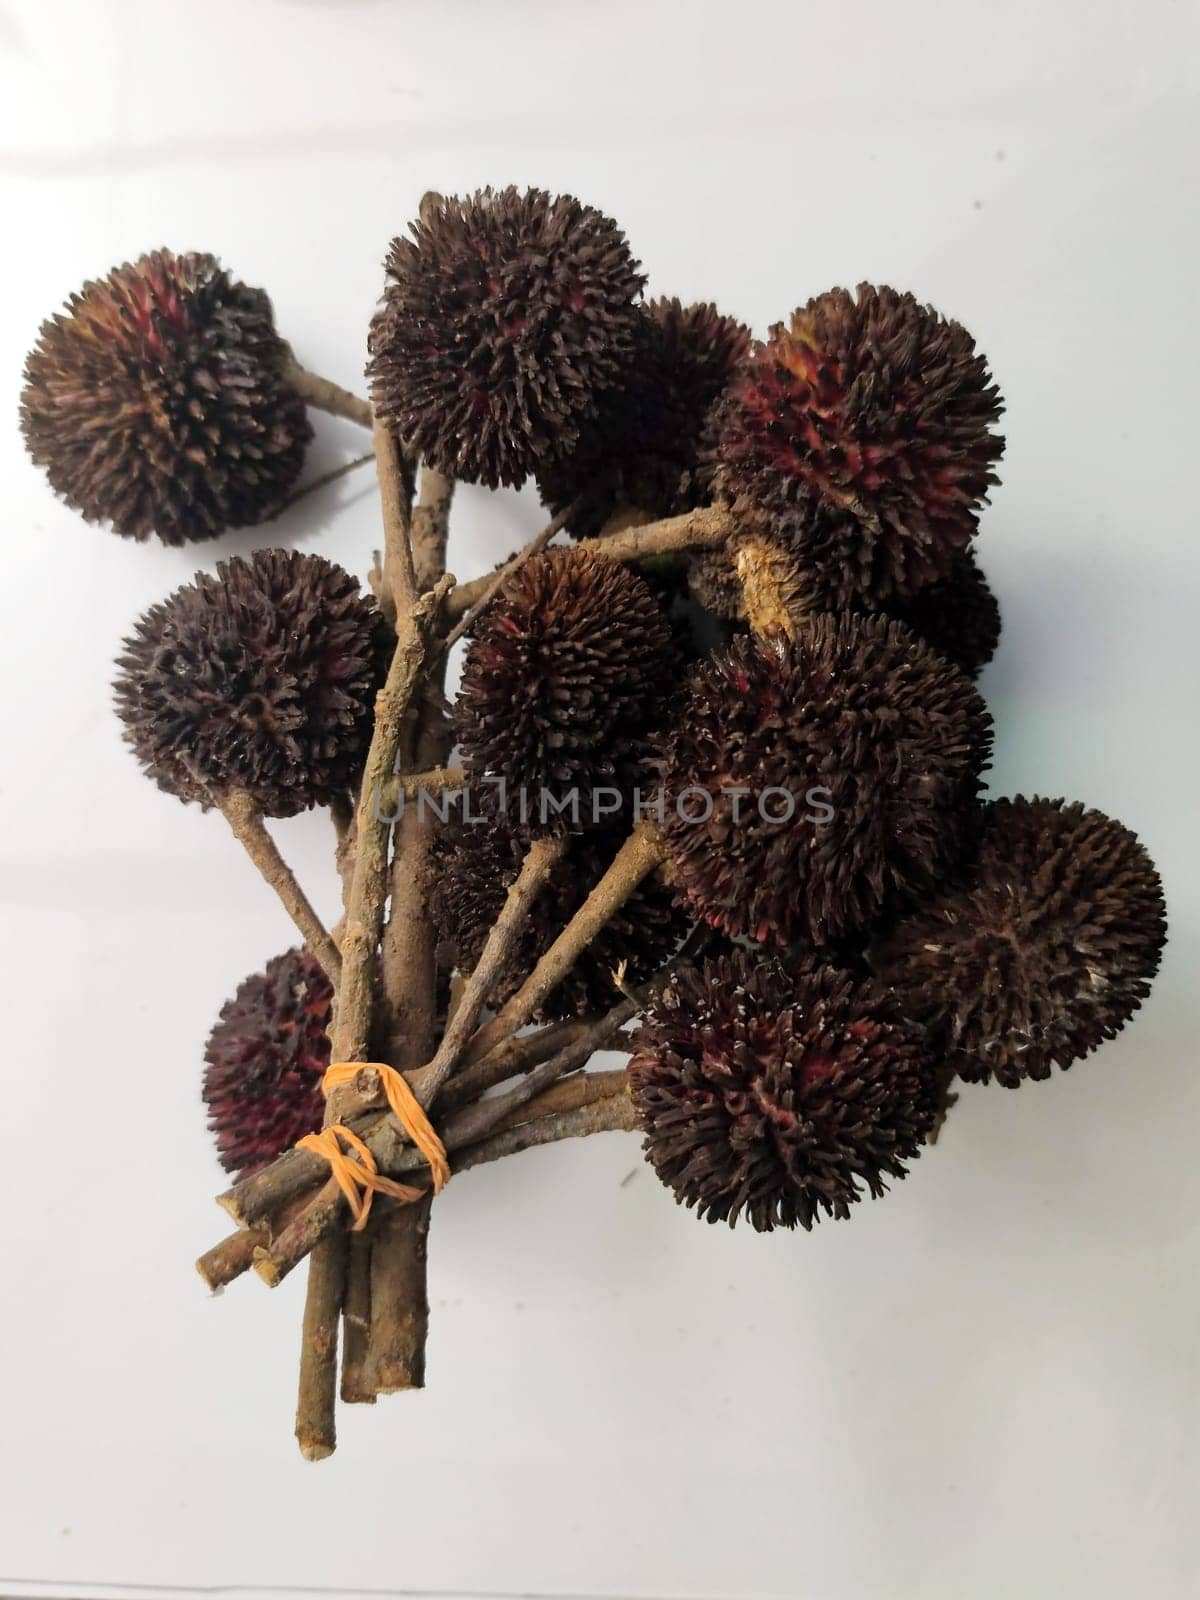 Tropical fruit Pulasan on a white background close-up by Annado